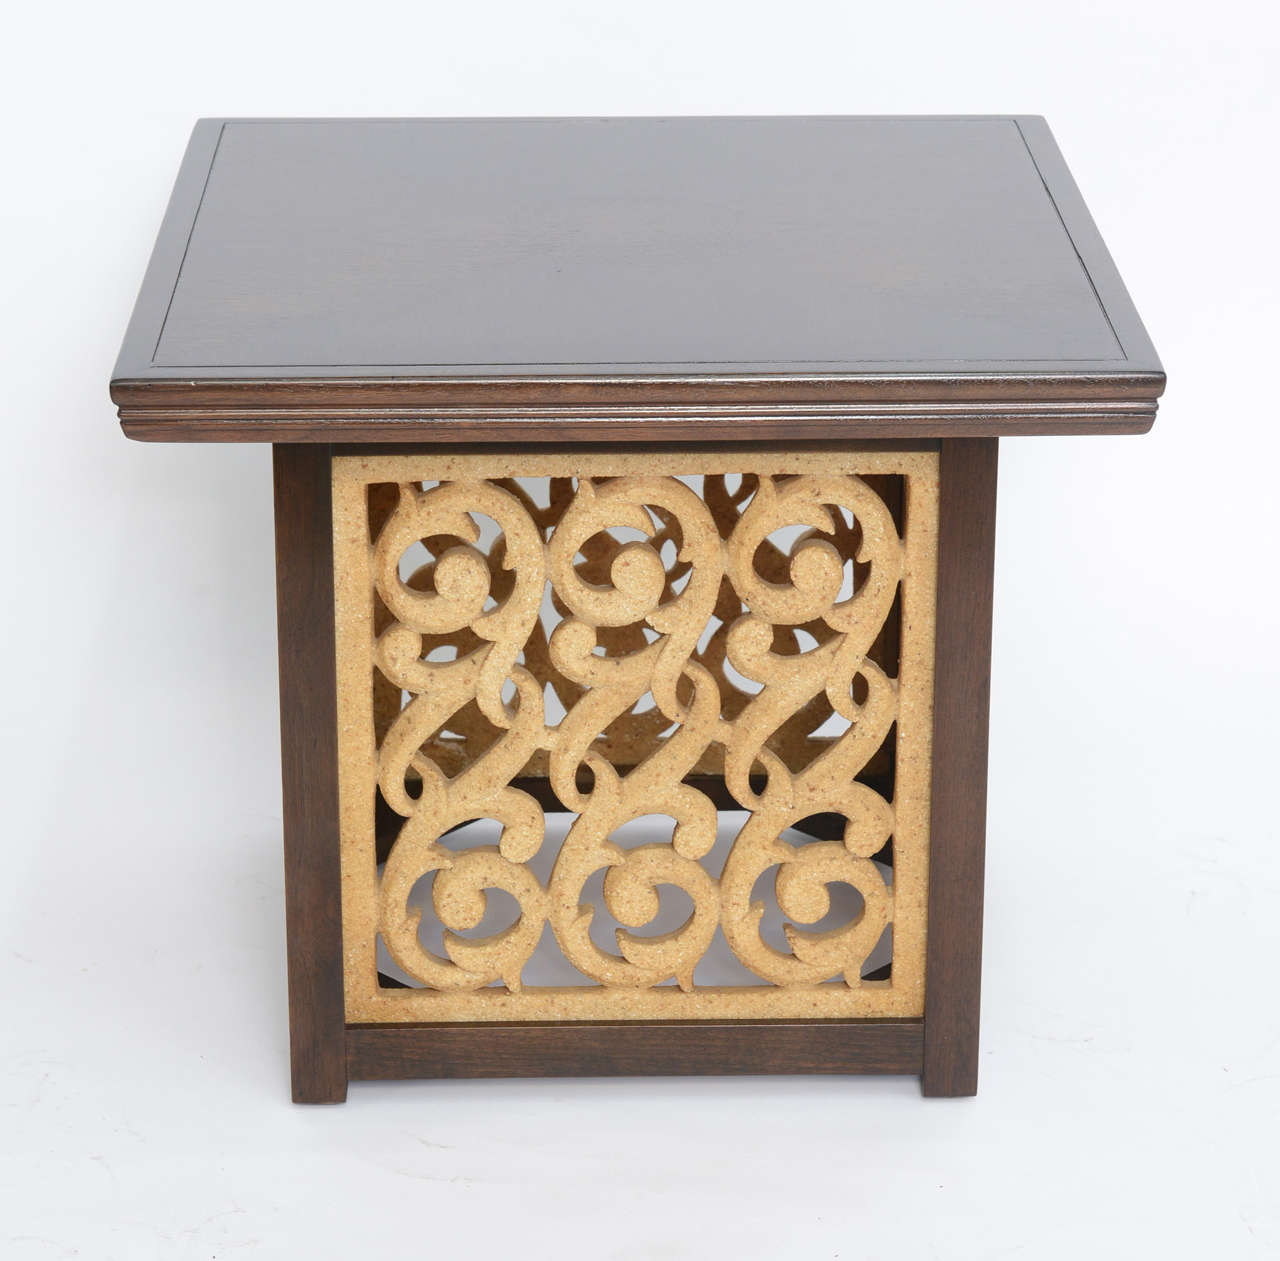 REDUCED FROM $2,250.
Rarely seen, this Widdicomb table features an elegant square molded and inlaid walnut top and legs in Sable color with cast sculptural resin panels in a repeating C-scroll design. inlay design is quartered with a circular